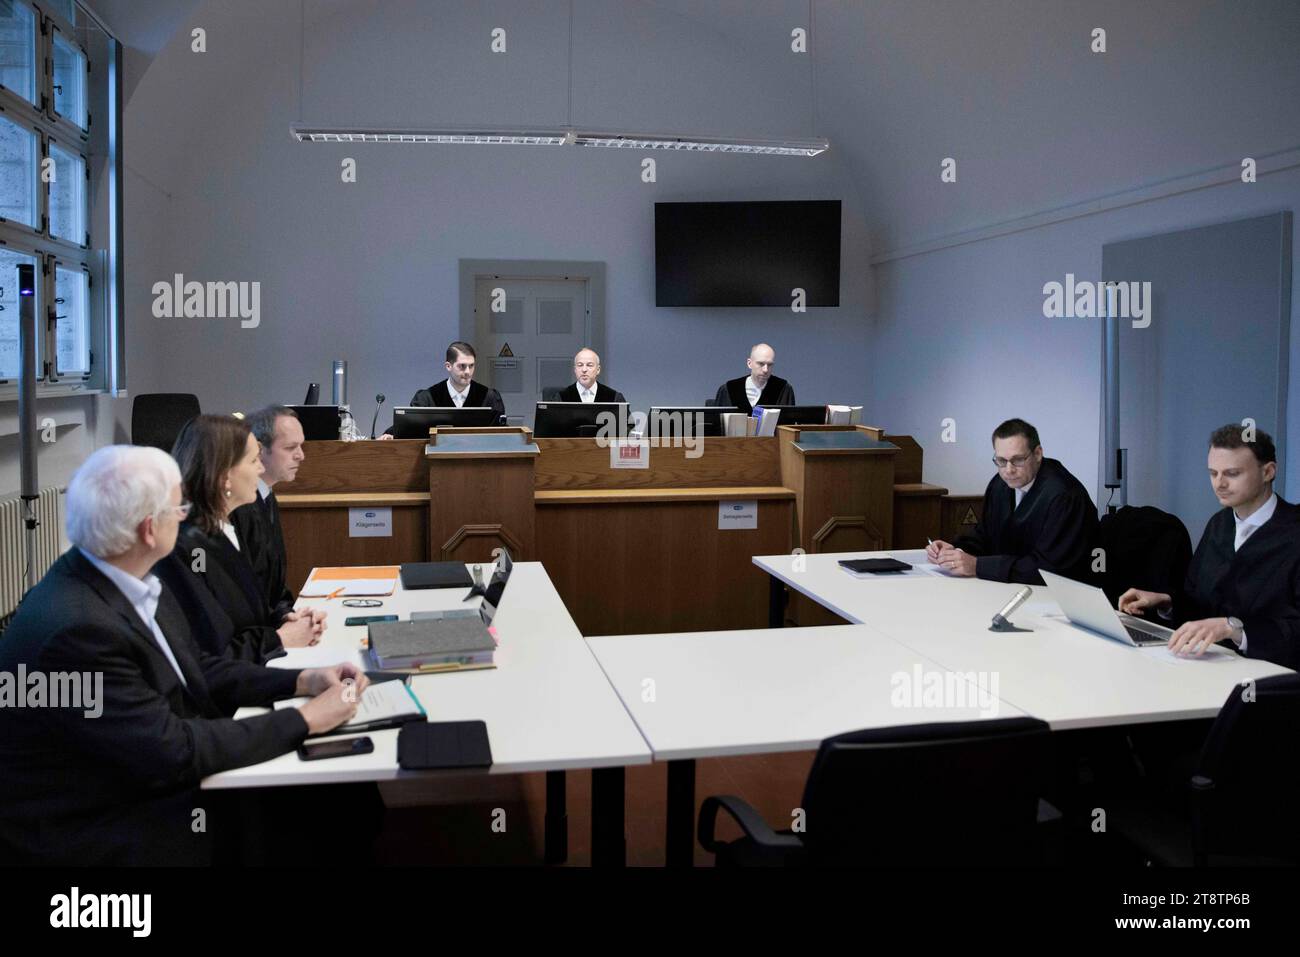 21 November 2023, Berlin: Jürgen Resch (l-r), Managing Director of Deutsche Umwelthilfe (DUH), Juliane Schütt, lawyer, Tobias Bulling, lawyer, and Holger Thiel (M), judge in the case, sit in the courtroom before the start of the hearing of DUH's landmark lawsuit against US internet giant Meta (Facebook, Instagram) at Berlin Regional Court. The lawsuit is based on threats of violence and murder in public Facebook groups. Resch is demanding that the Facebook parent company close certain groups and is attempting to enforce this with a model lawsuit. Photo: Carsten Koall/dpa Stock Photo